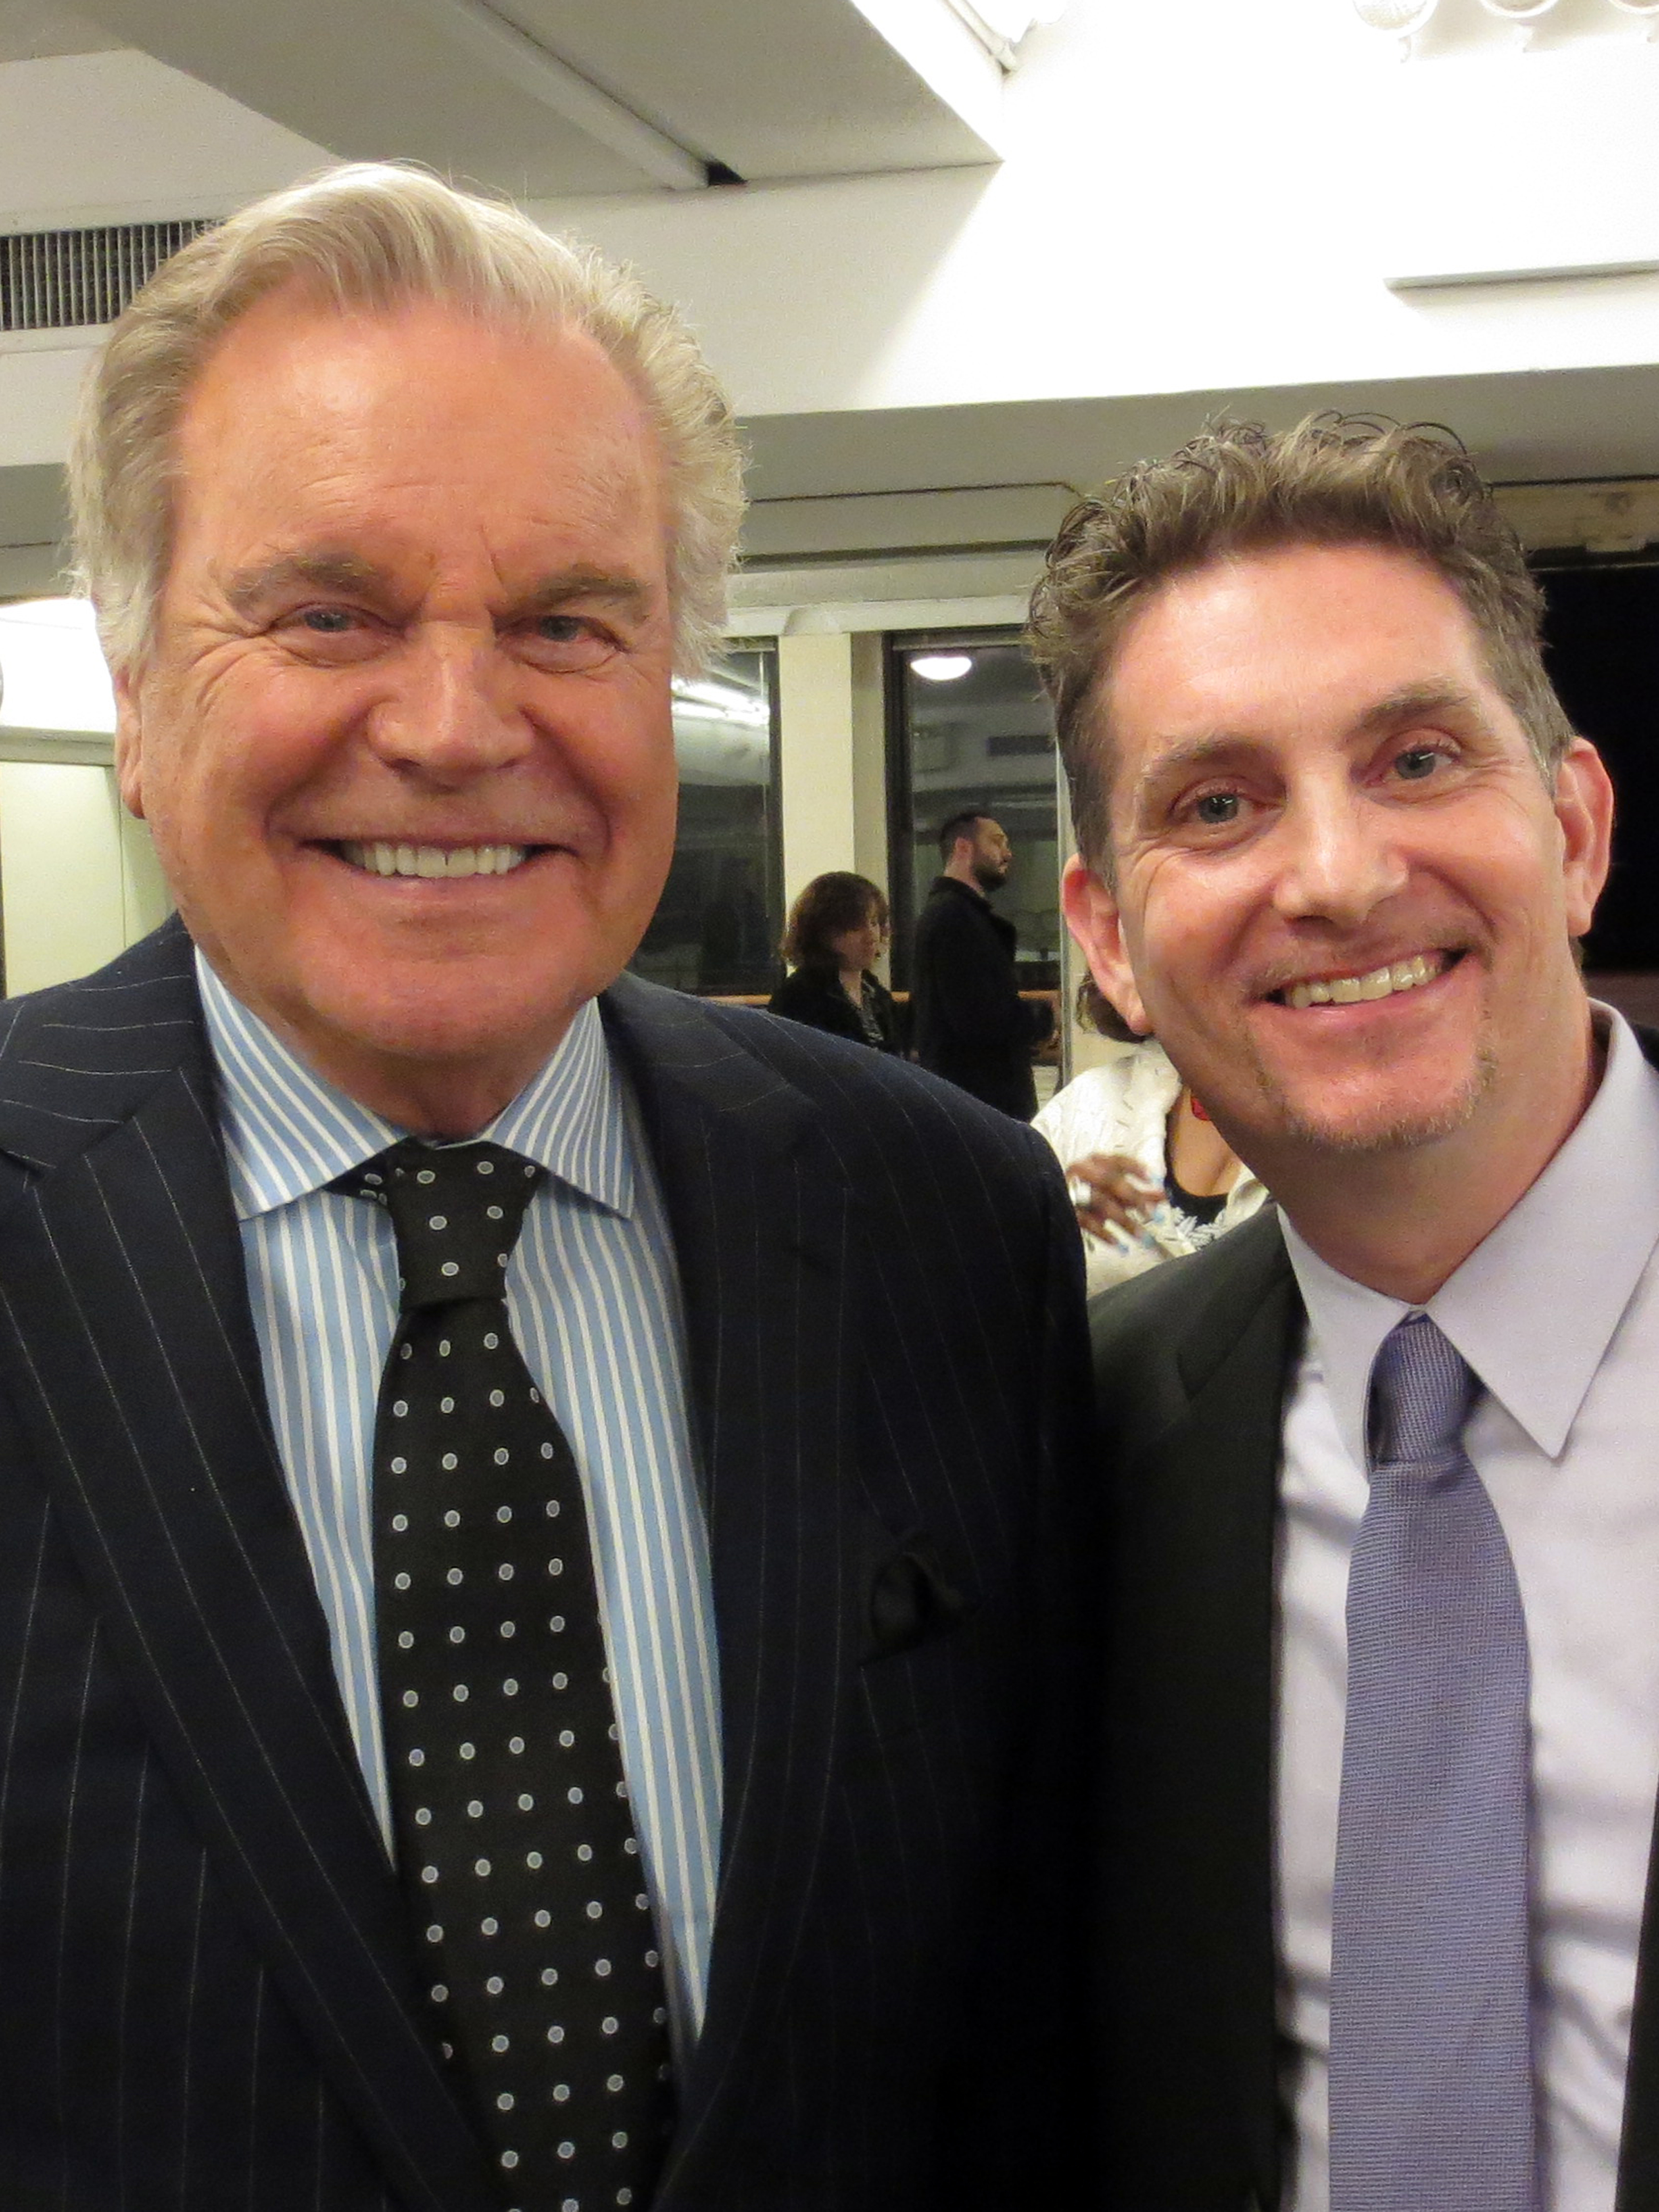 Robert Wagner and Michael Christaldi at his book launch party in New York City.